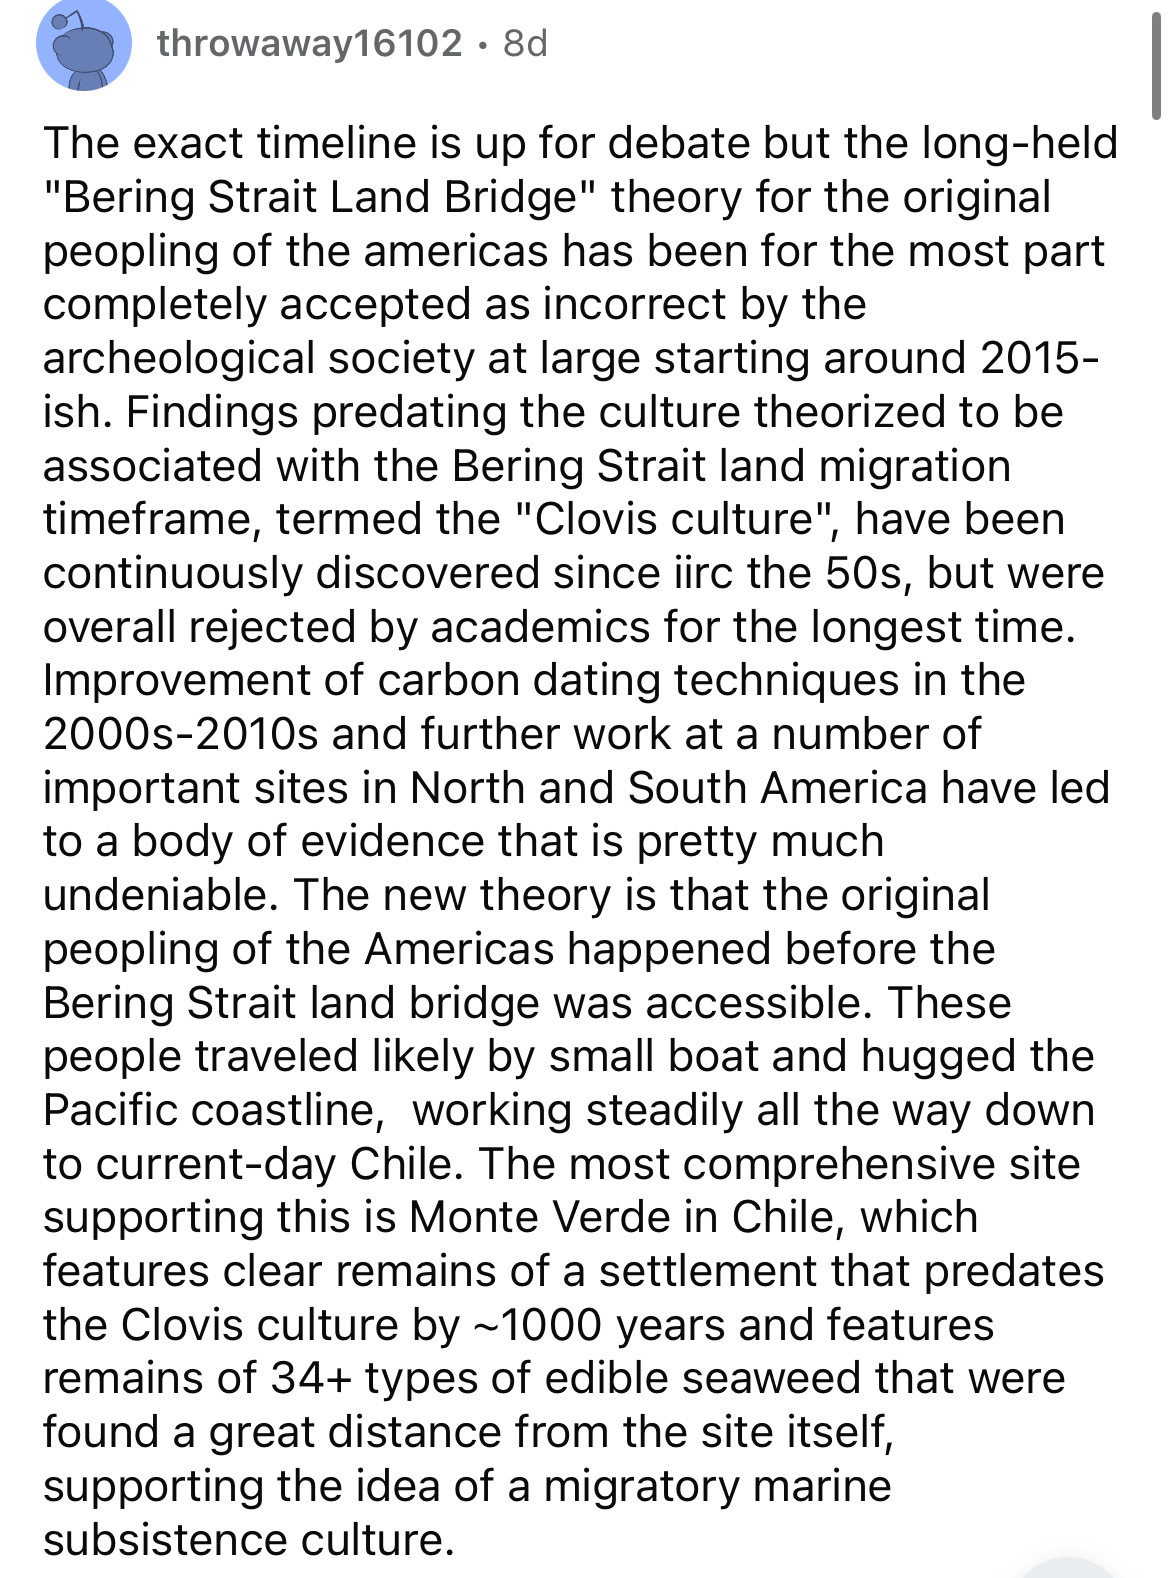 document - throwaway16102.8d The exact timeline is up for debate but the longheld "Bering Strait Land Bridge" theory for the original peopling of the americas has been for the most part completely accepted as incorrect by the archeological society at larg